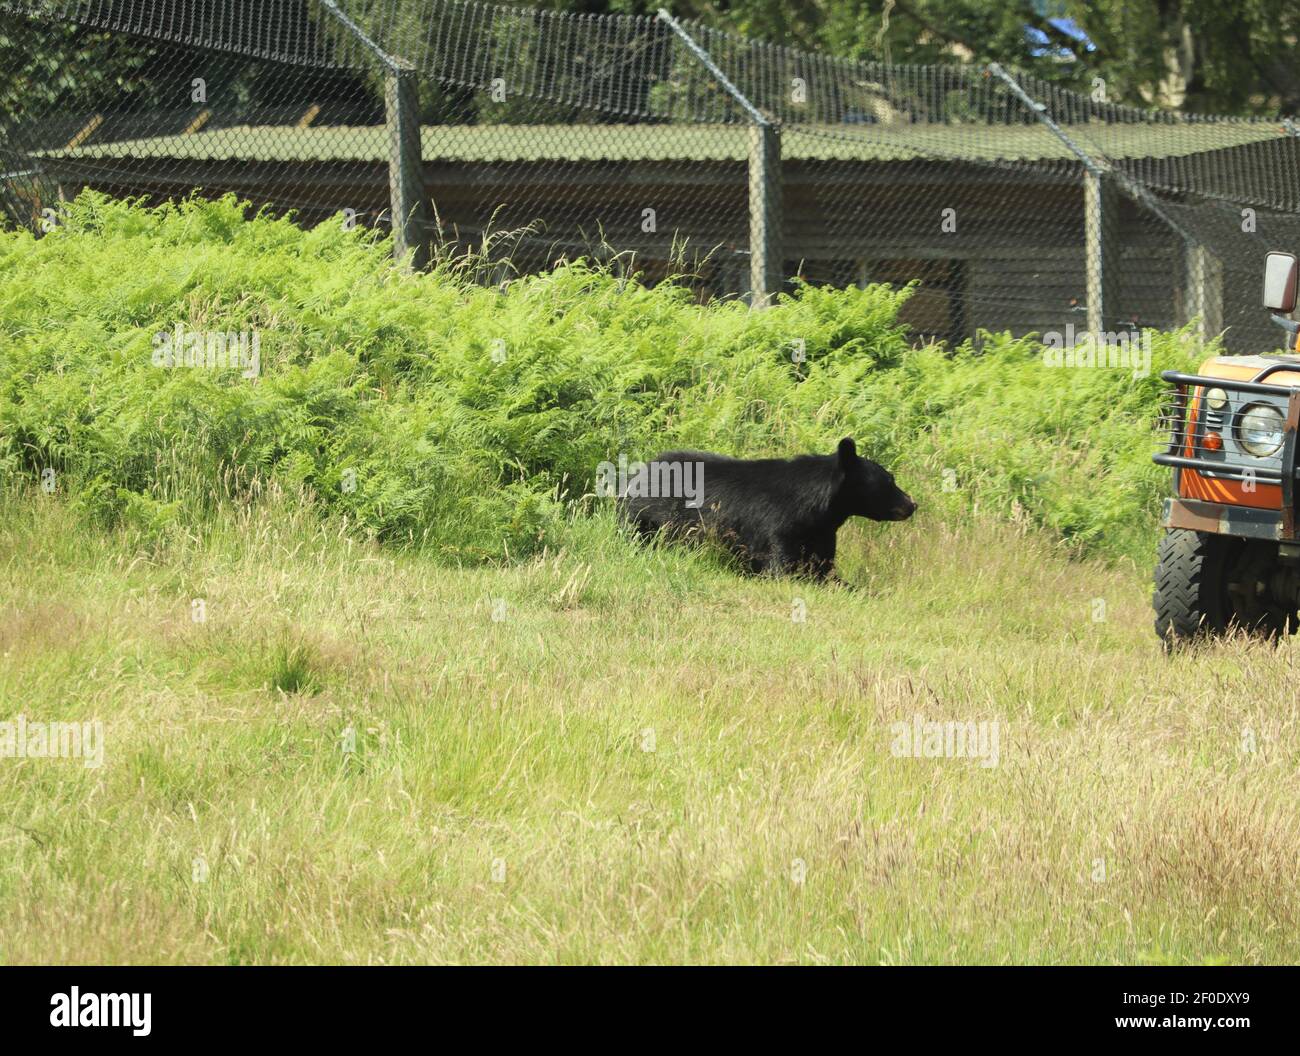 Bears and wolves in a safari park in the UK Stock Photo